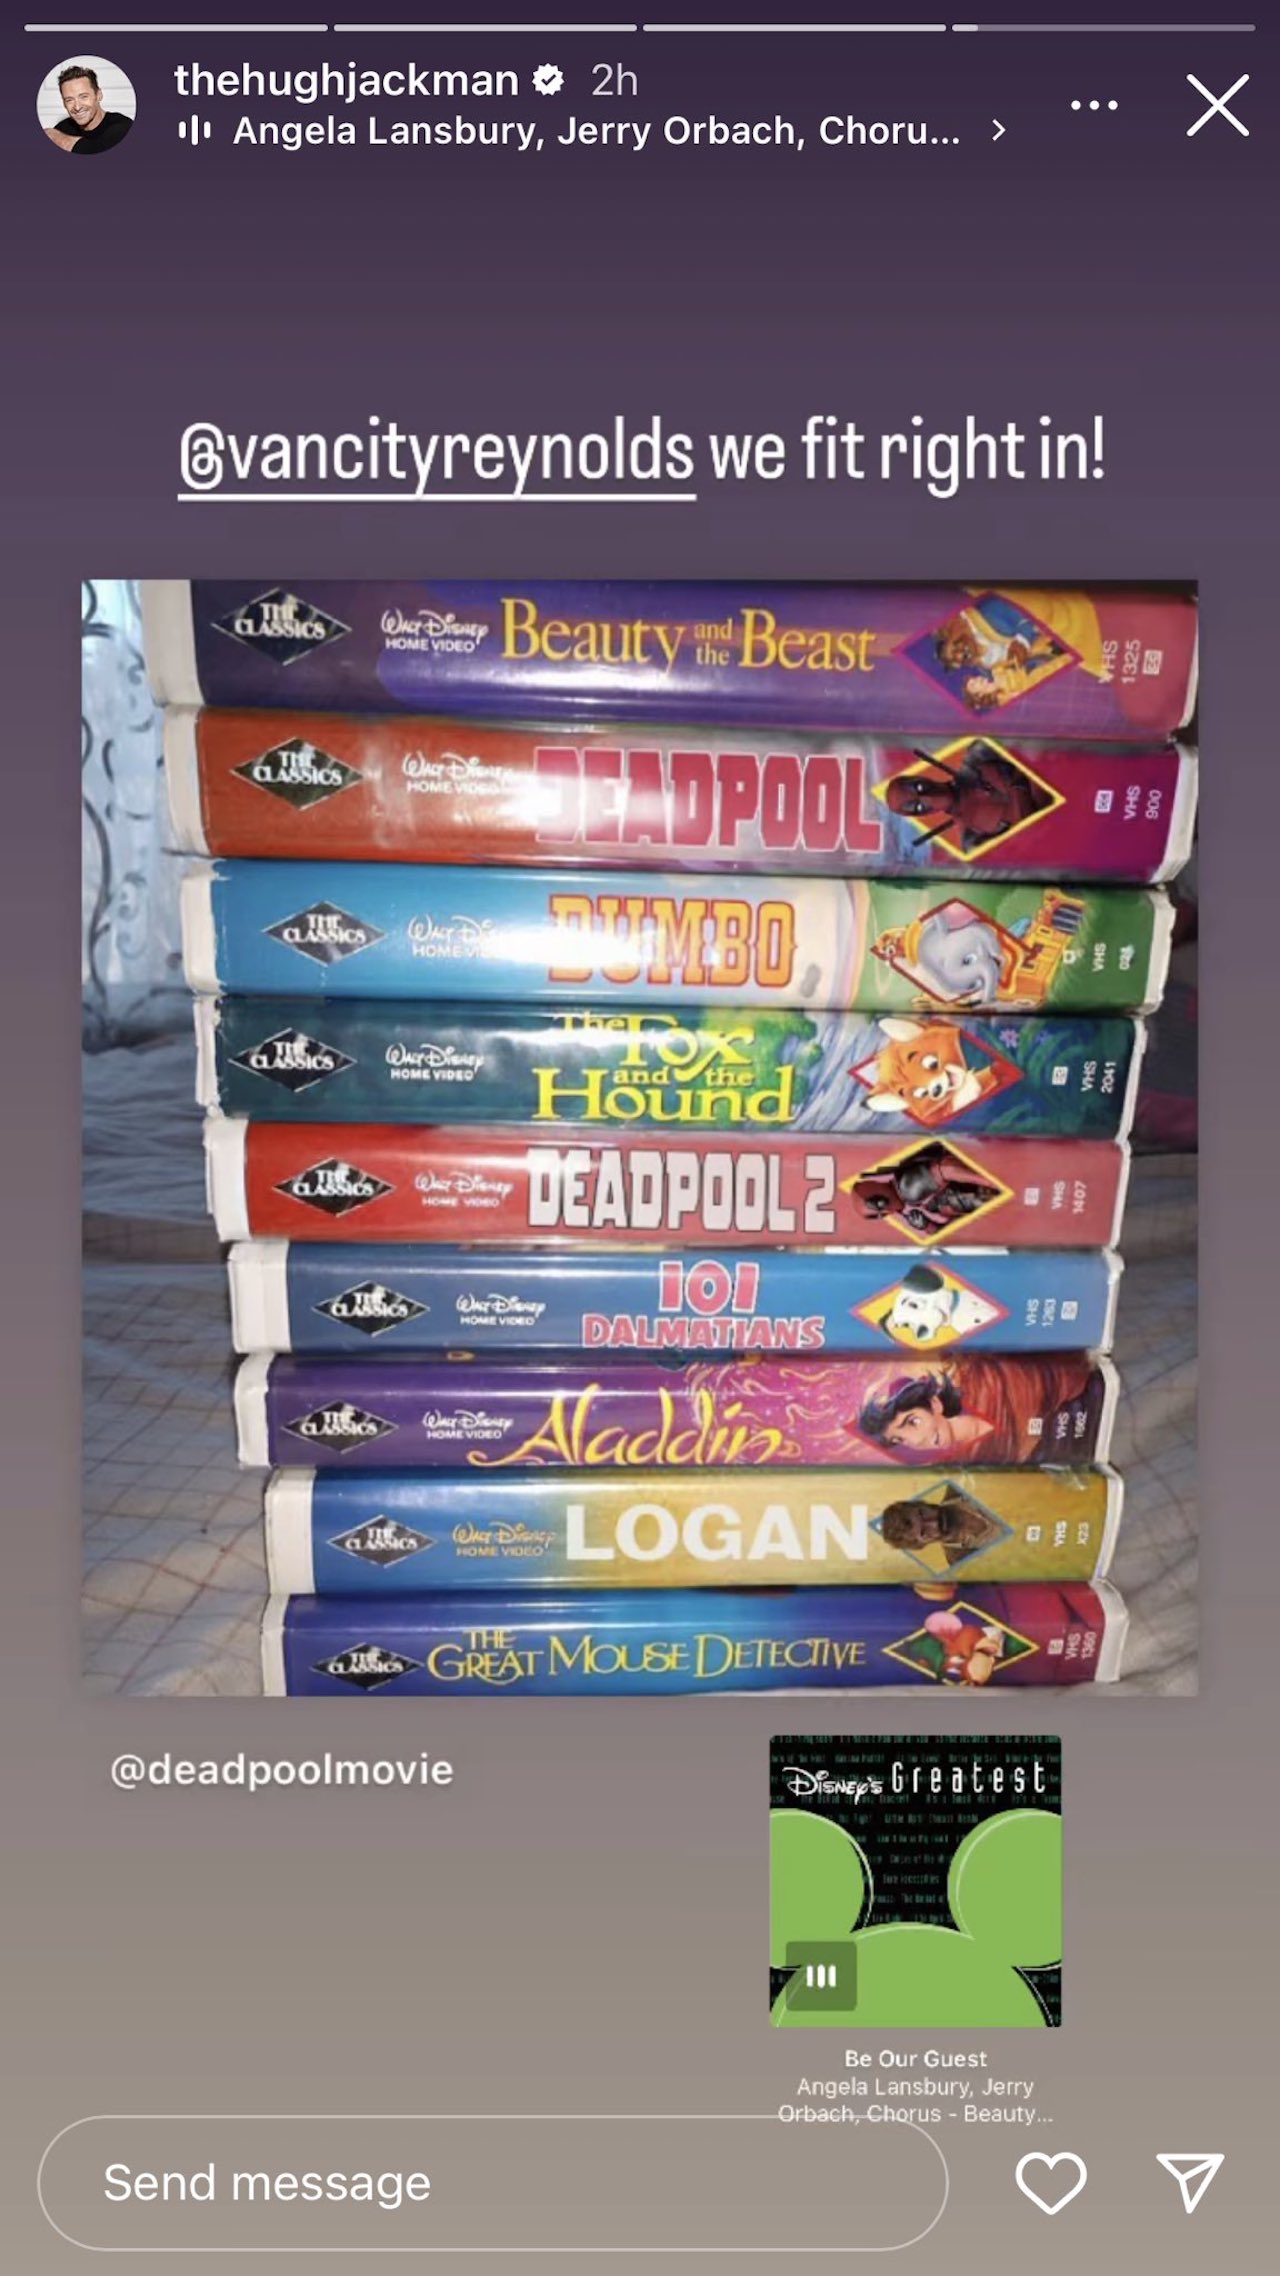 VHS versions of Deadpool, Deadpool 2, and Logan are stacked with Disney animated movies